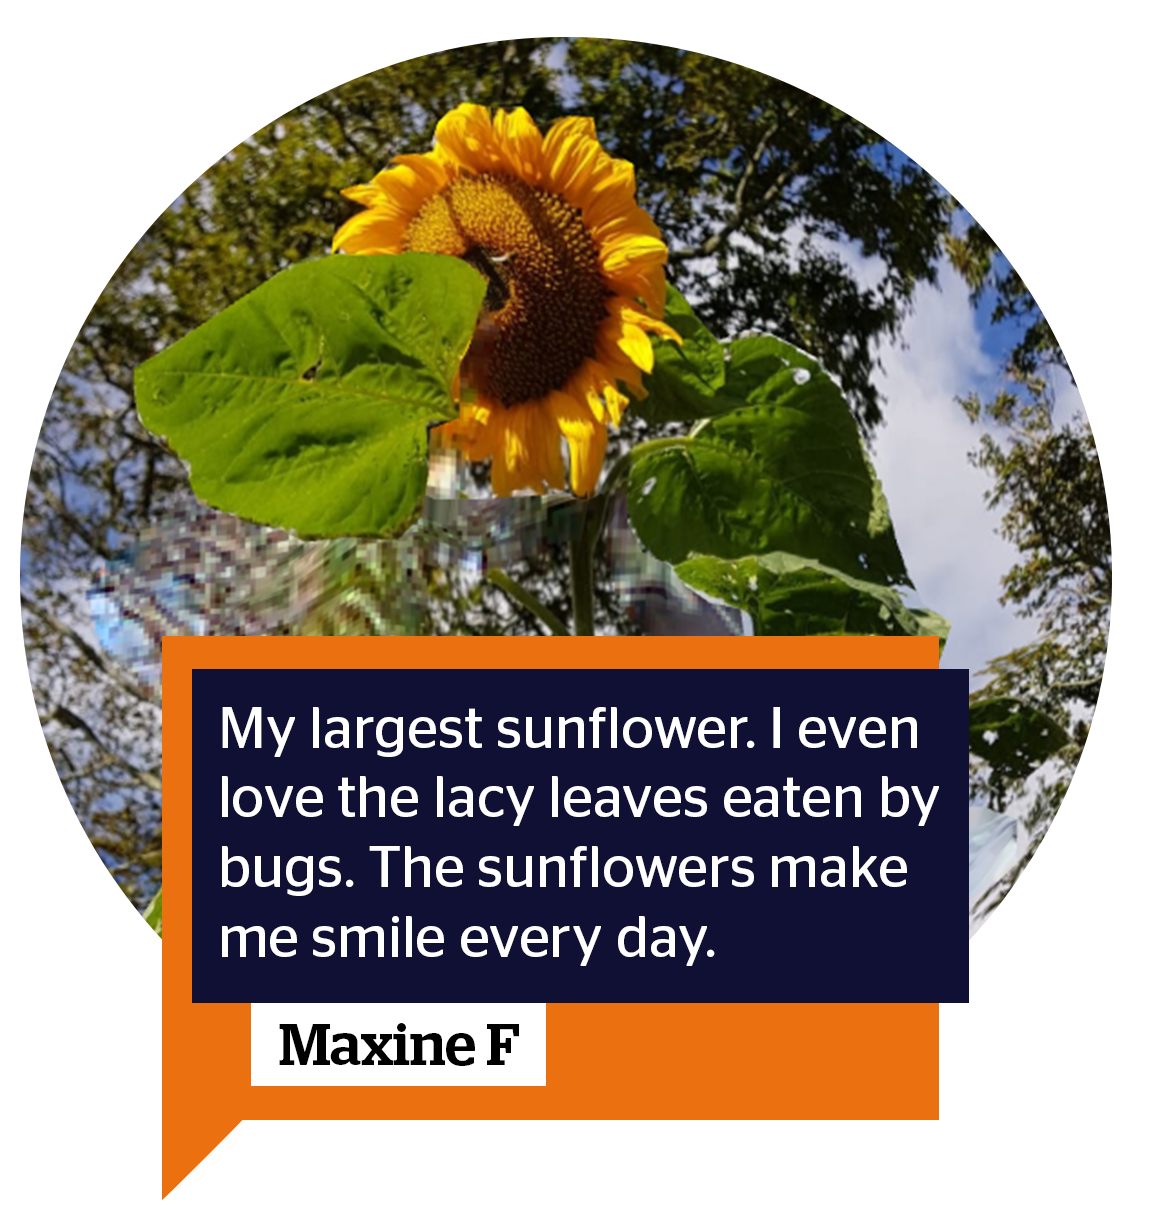 maxine f - My largest sun flower. I even love the lacy leaves eaten by bugs. The sunflowers make me smile every day. Well done Together TV